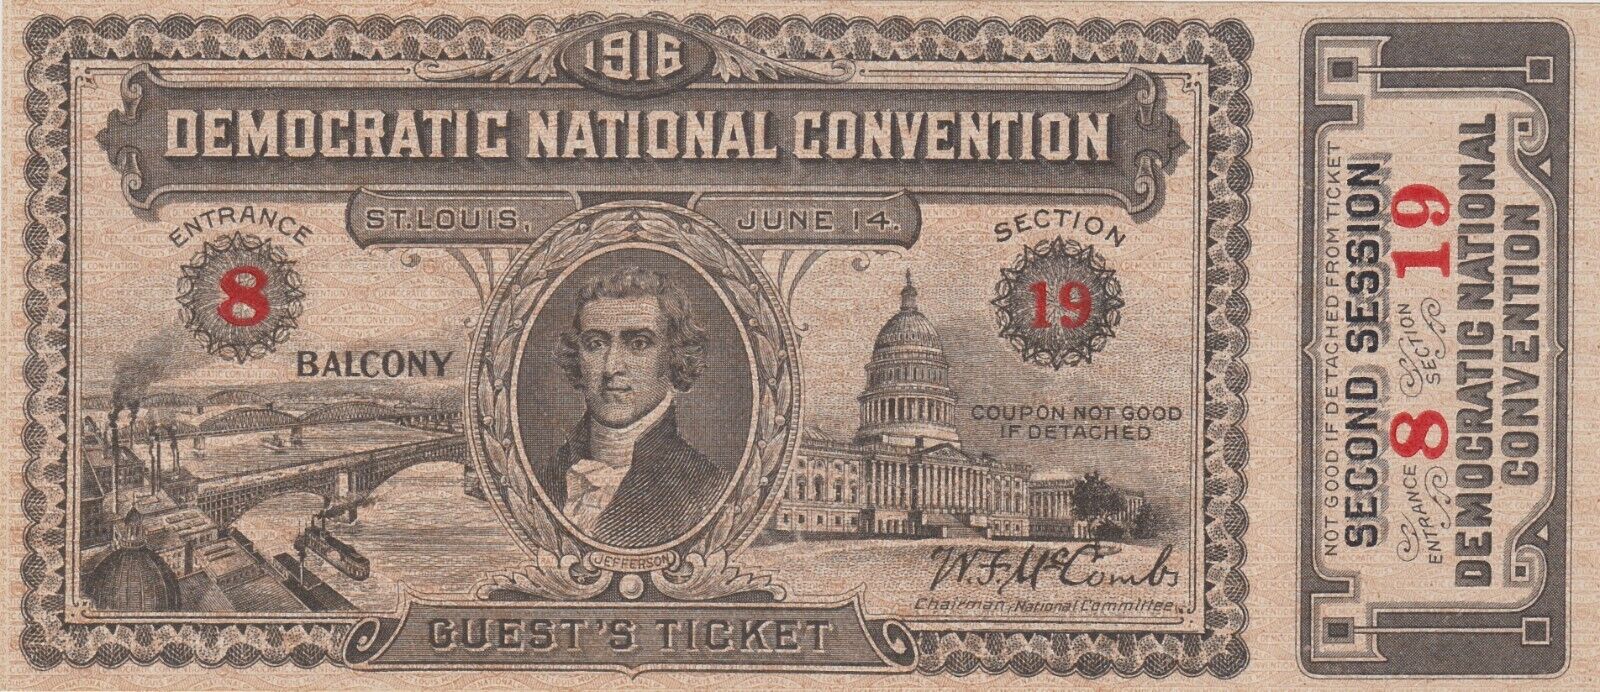 1916 DEMOCRATIC NATIONAL CONVENTION TICKET WITH STUB XF CONDITION WOODROW WILSON